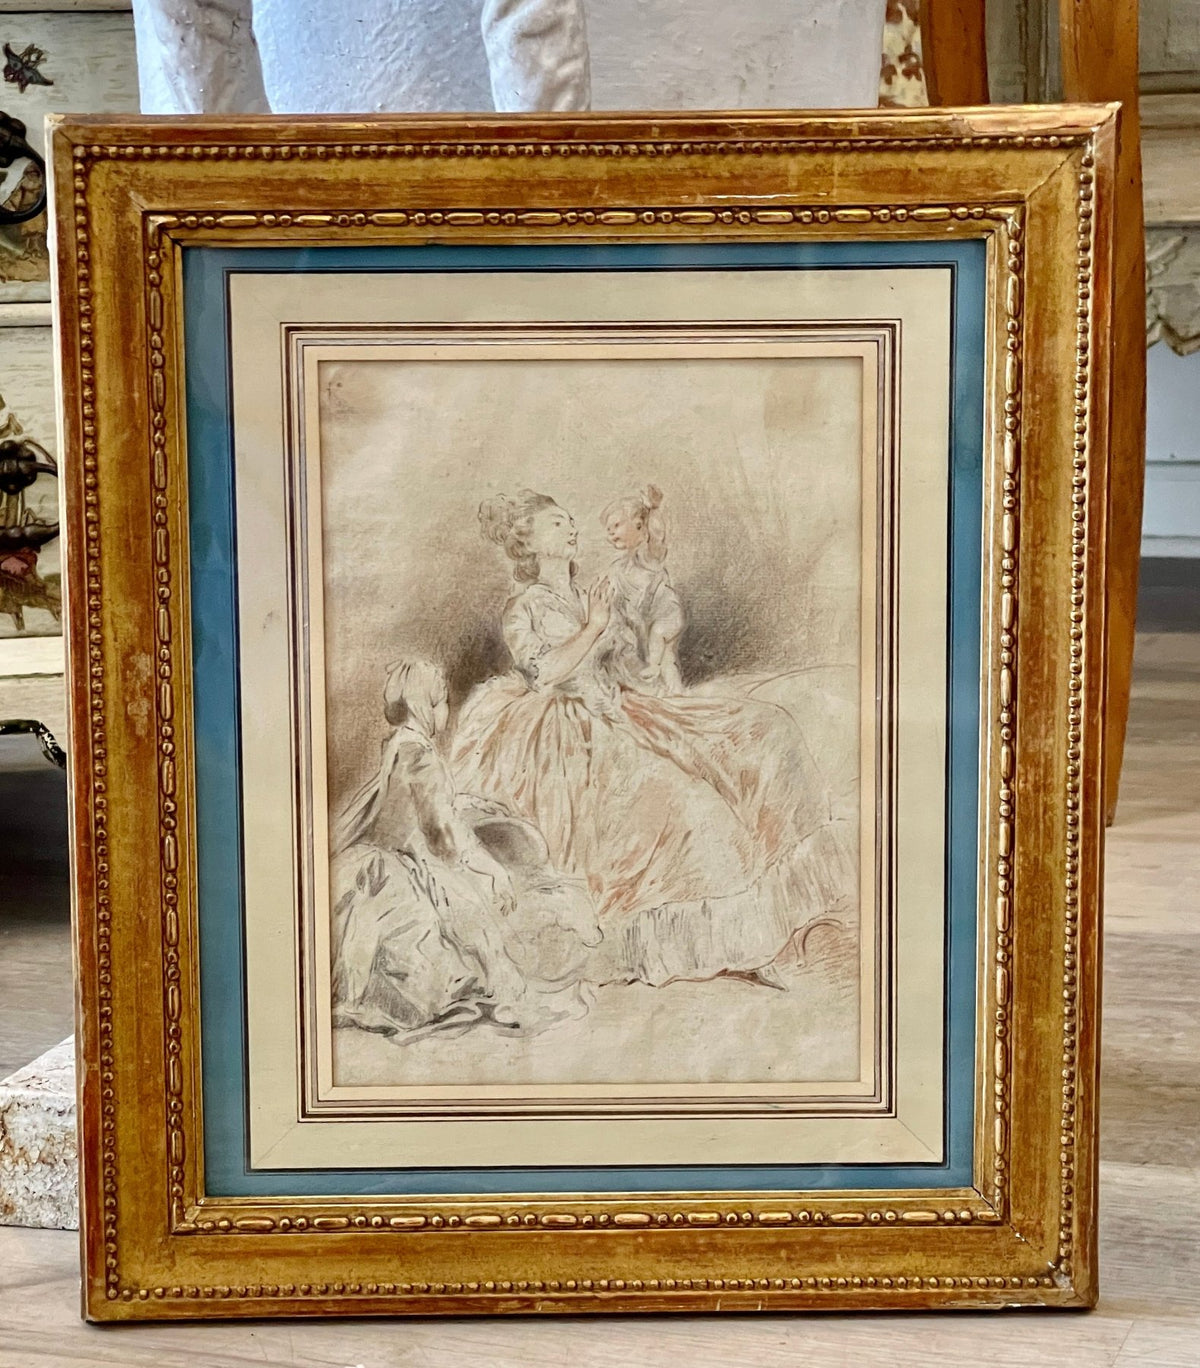 Sepia and Charcoal Sketch Attributed to Jean - Honore Fragonard - Helen Storey Antiques